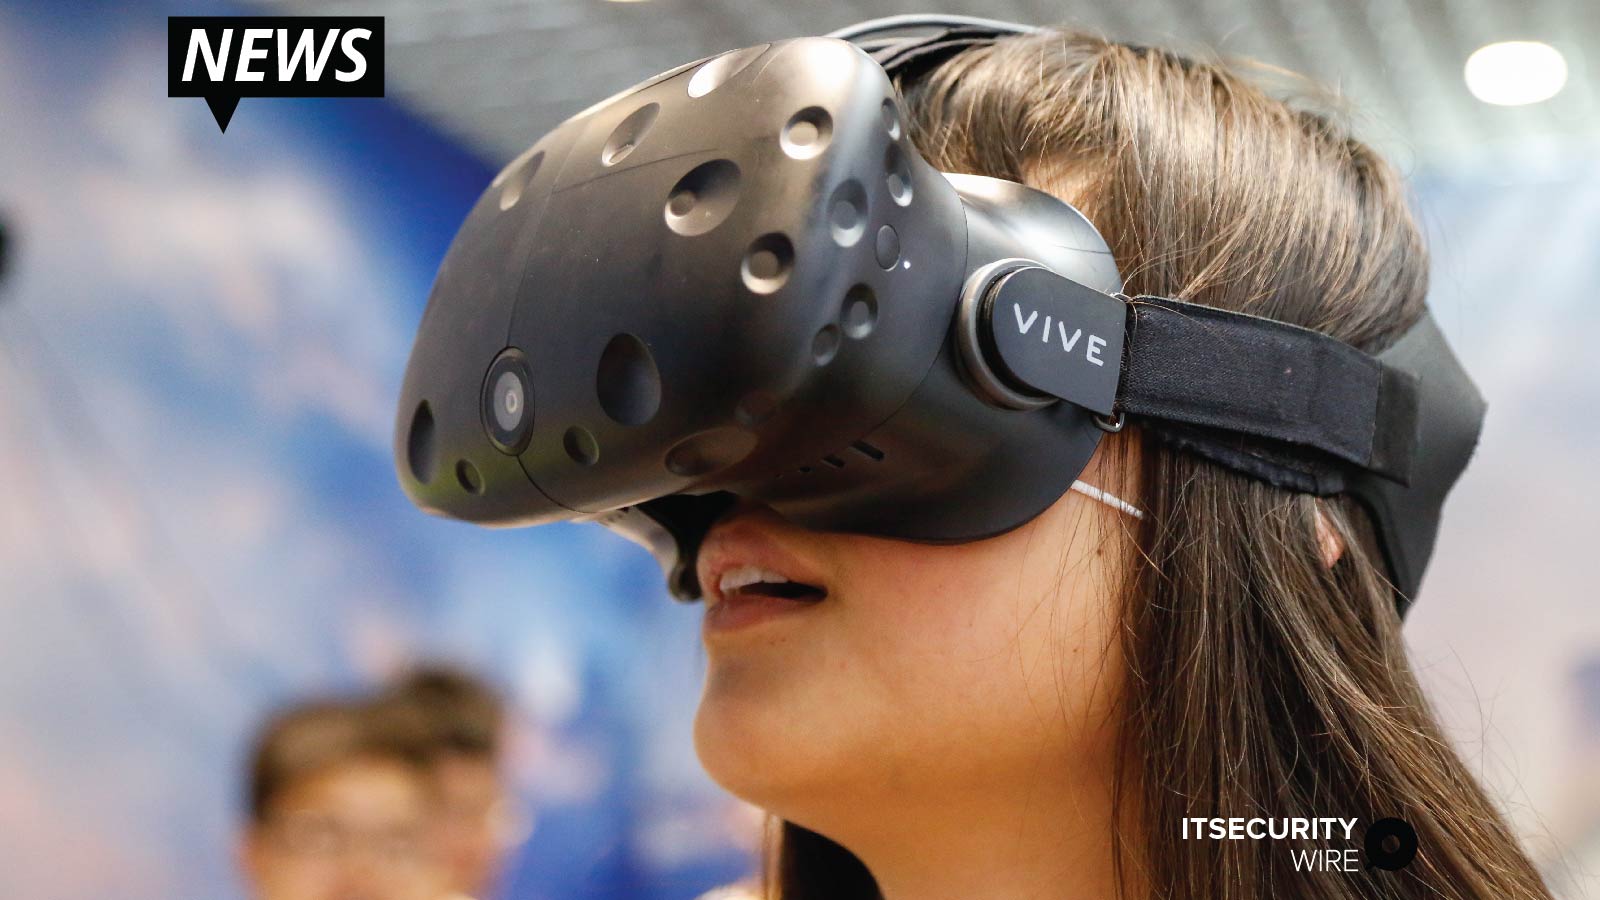 HTC With PNY Technologies Offer Secure, Professional-Grade VR Solution